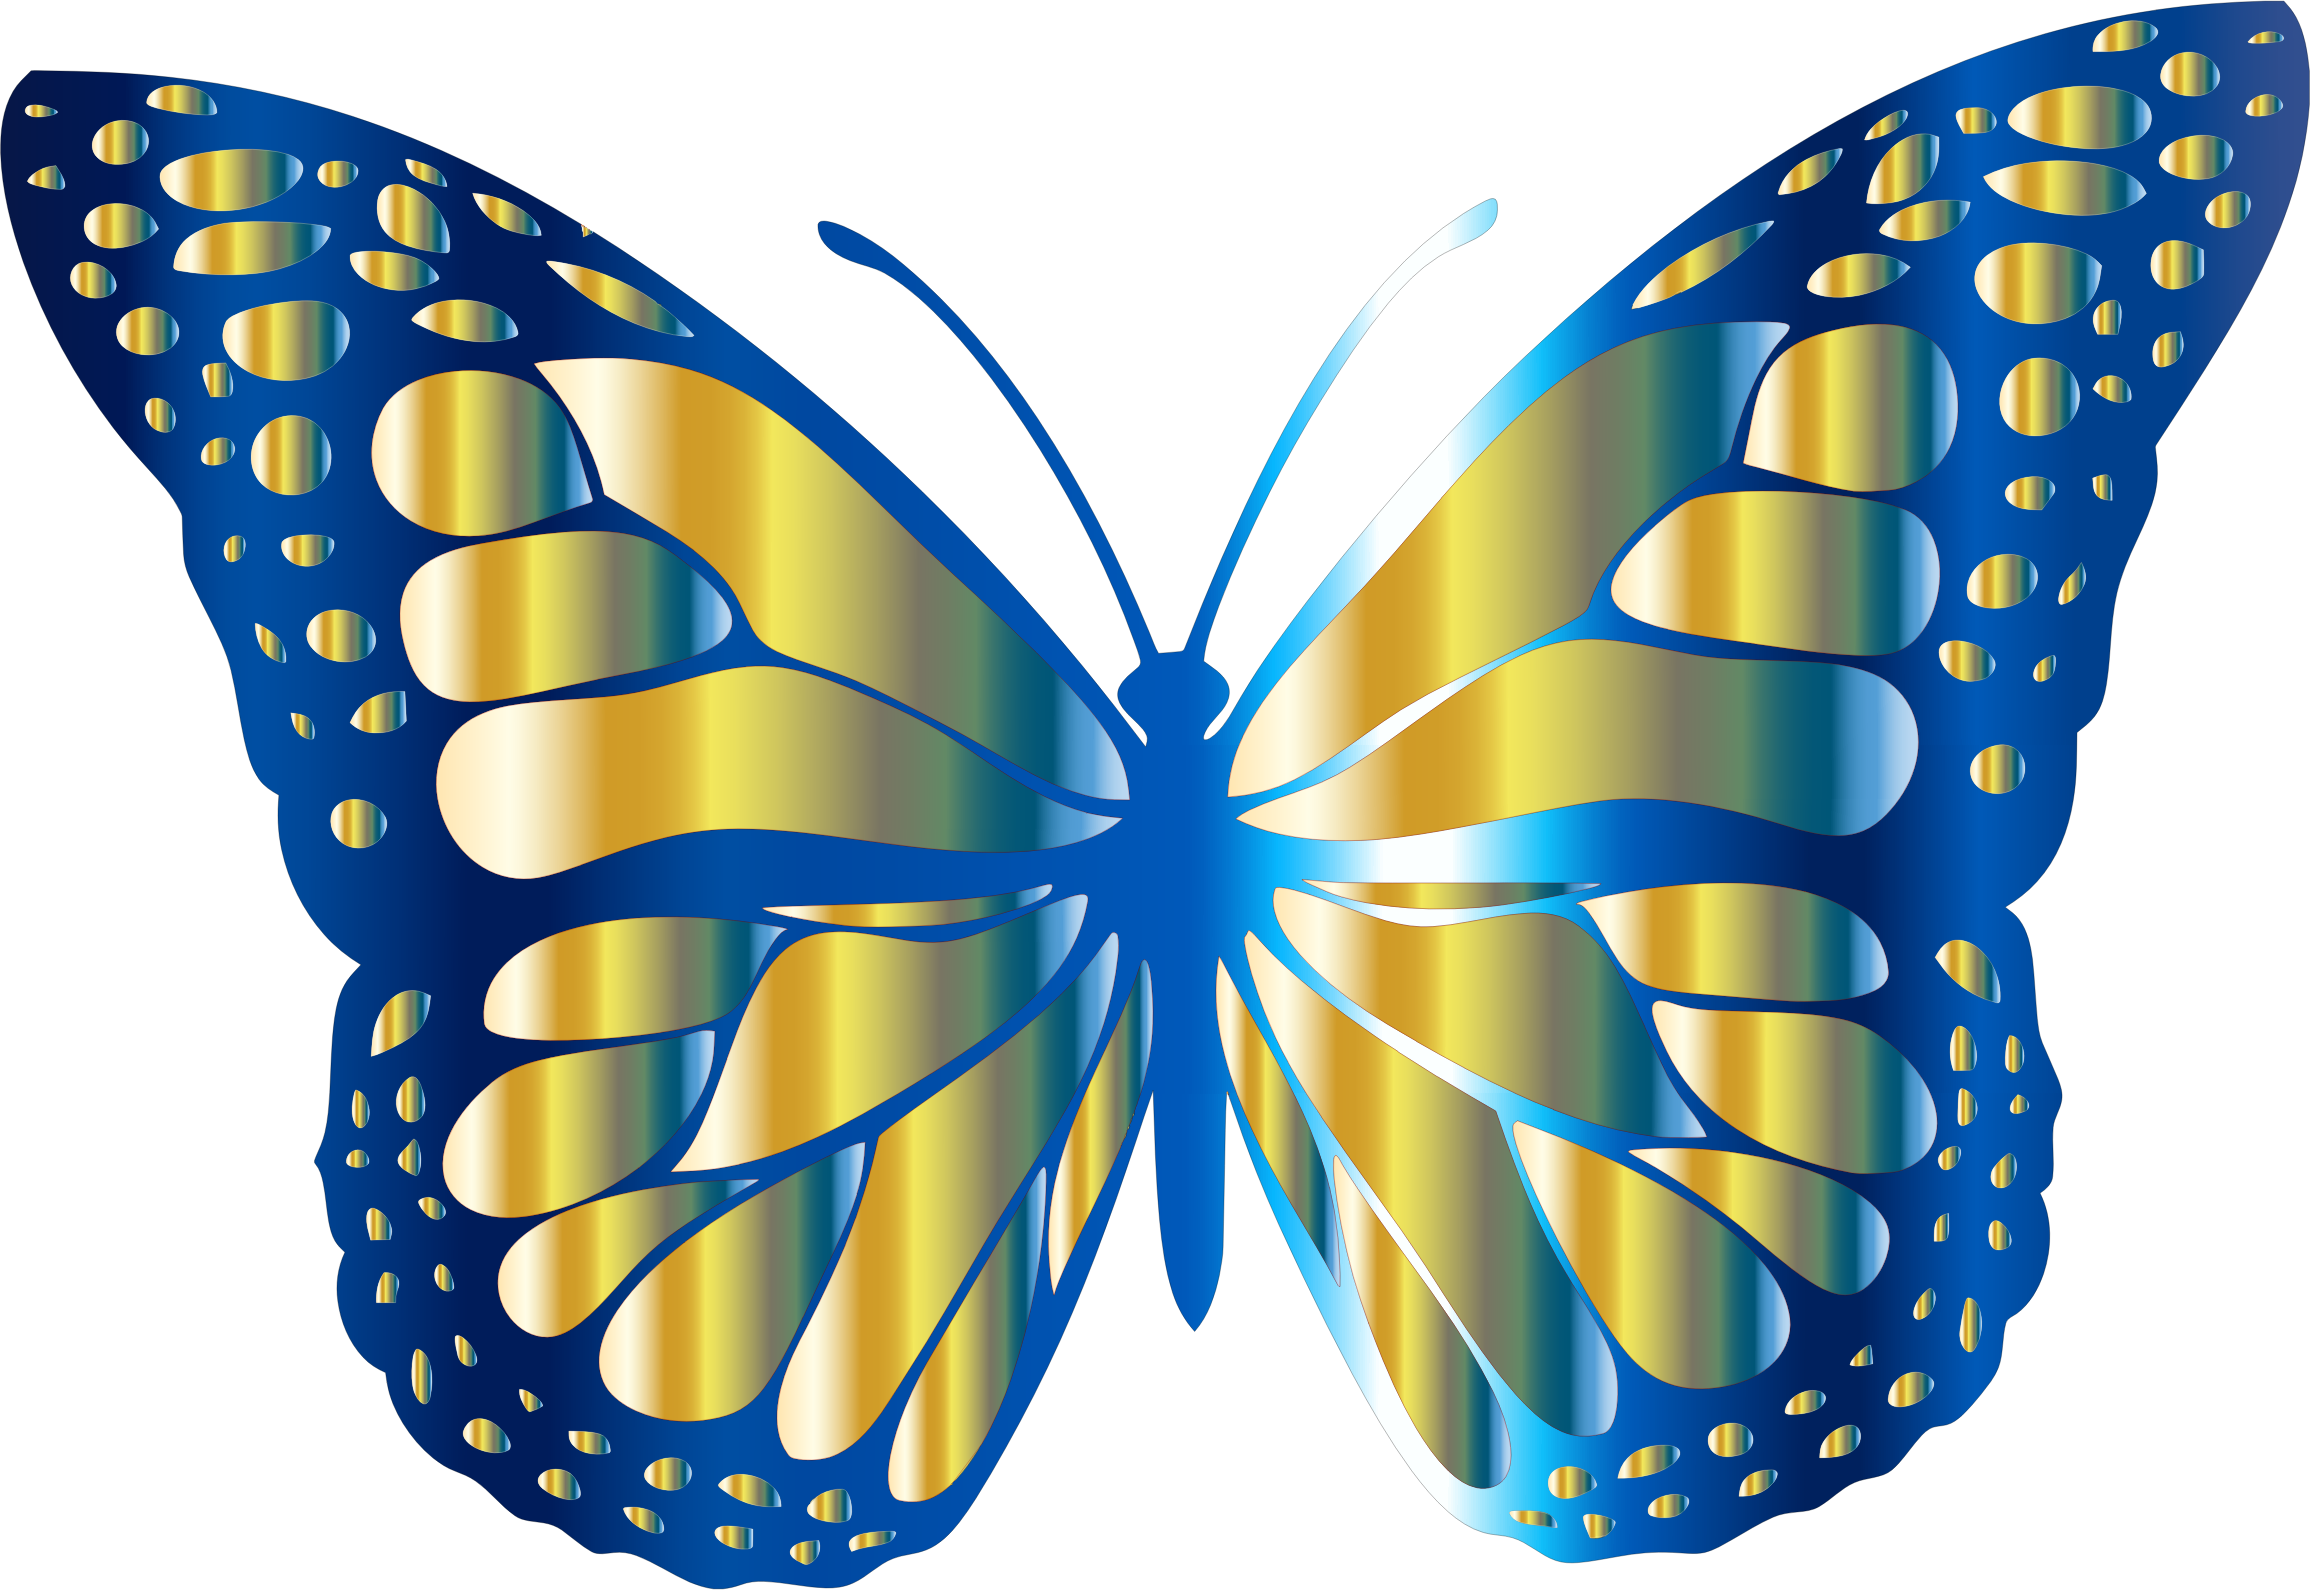 Download Blue and Gold Monarch Butterfly Vector Files image - Free ...